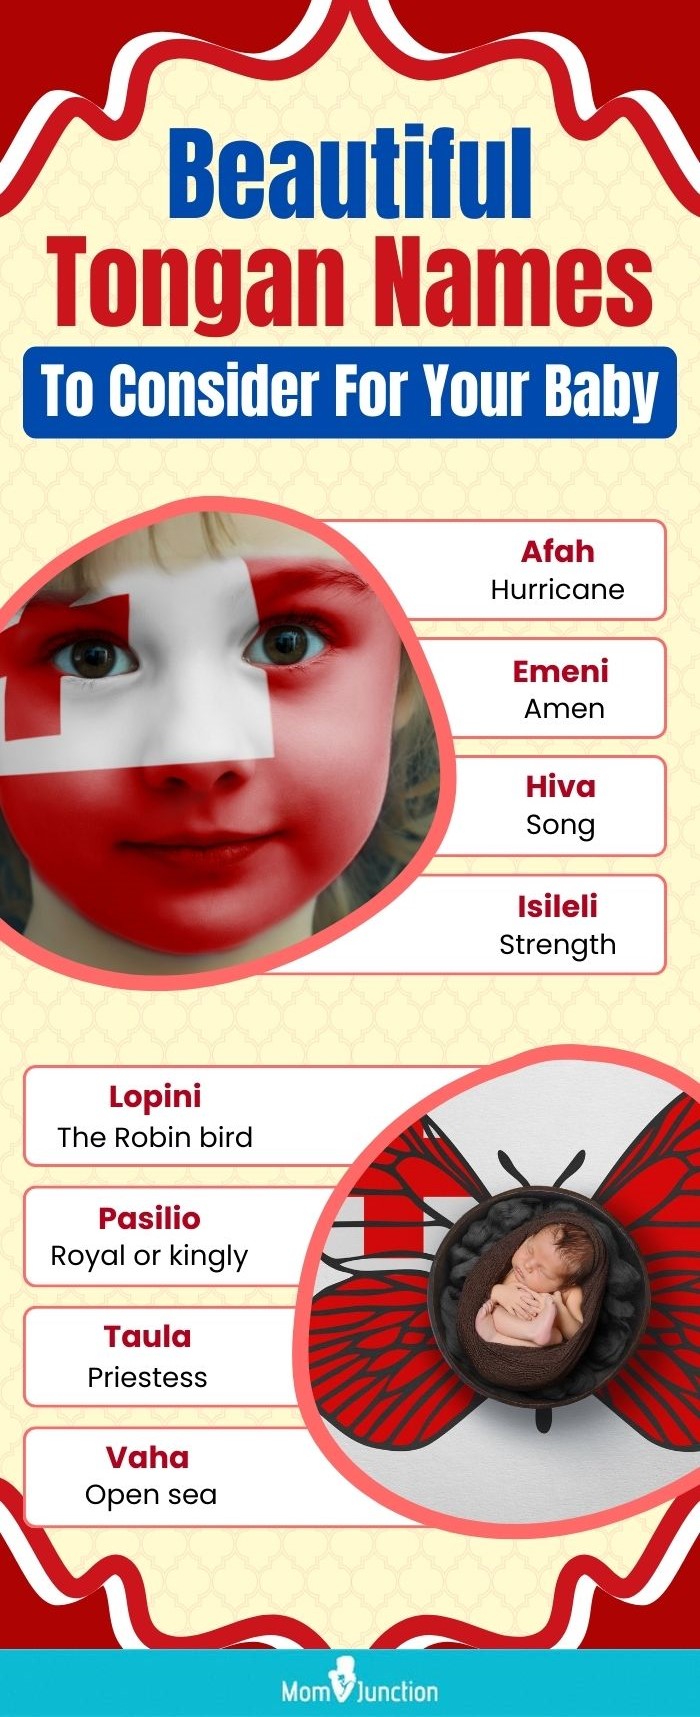 beautiful tongan names to consider for your baby (infographic)